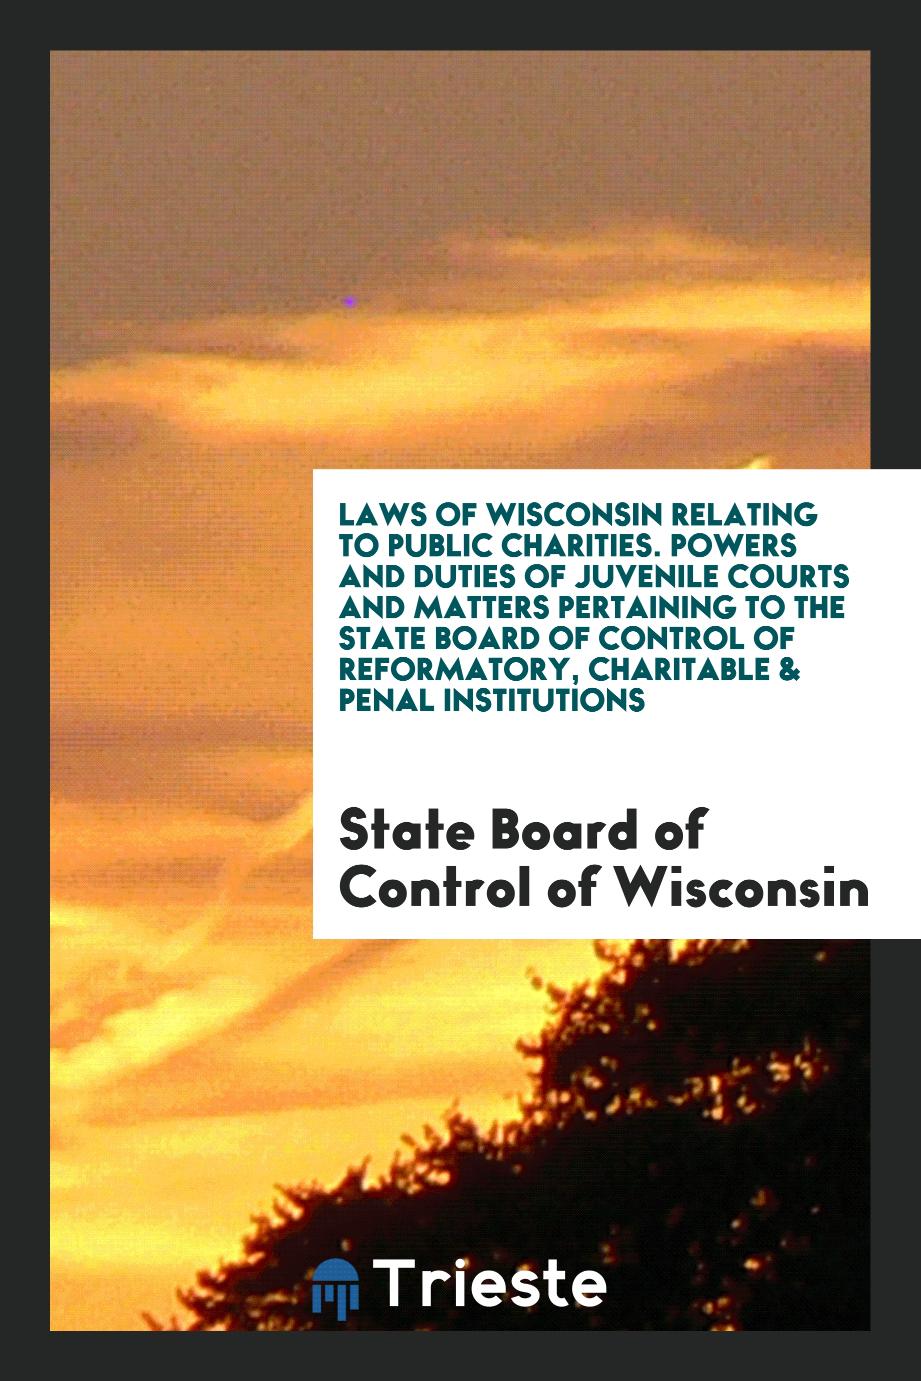 Laws of Wisconsin Relating to Public Charities. Powers and Duties of Juvenile Courts and Matters Pertaining to the State Board of Control of Reformatory, Charitable & Penal Institutions